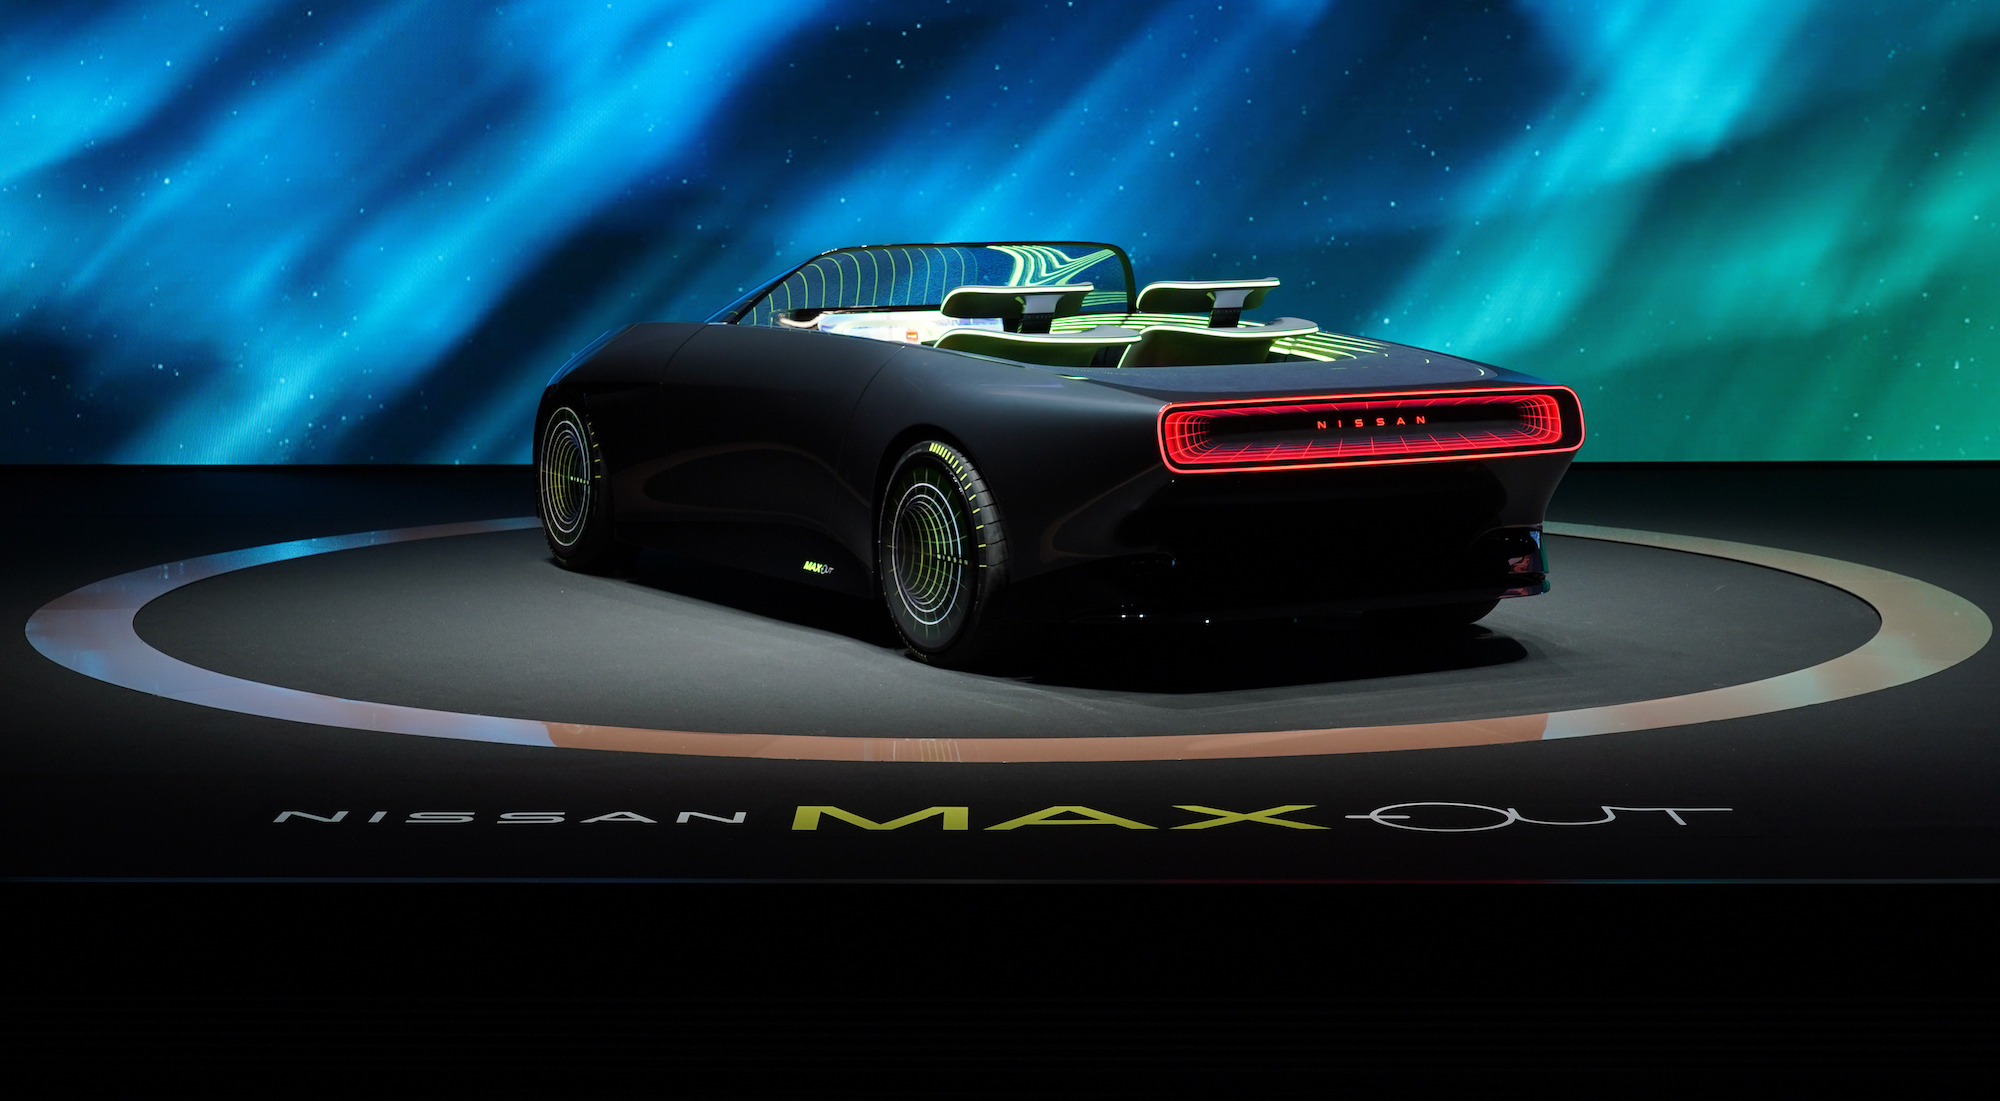 Nissan Max Out convertible concept